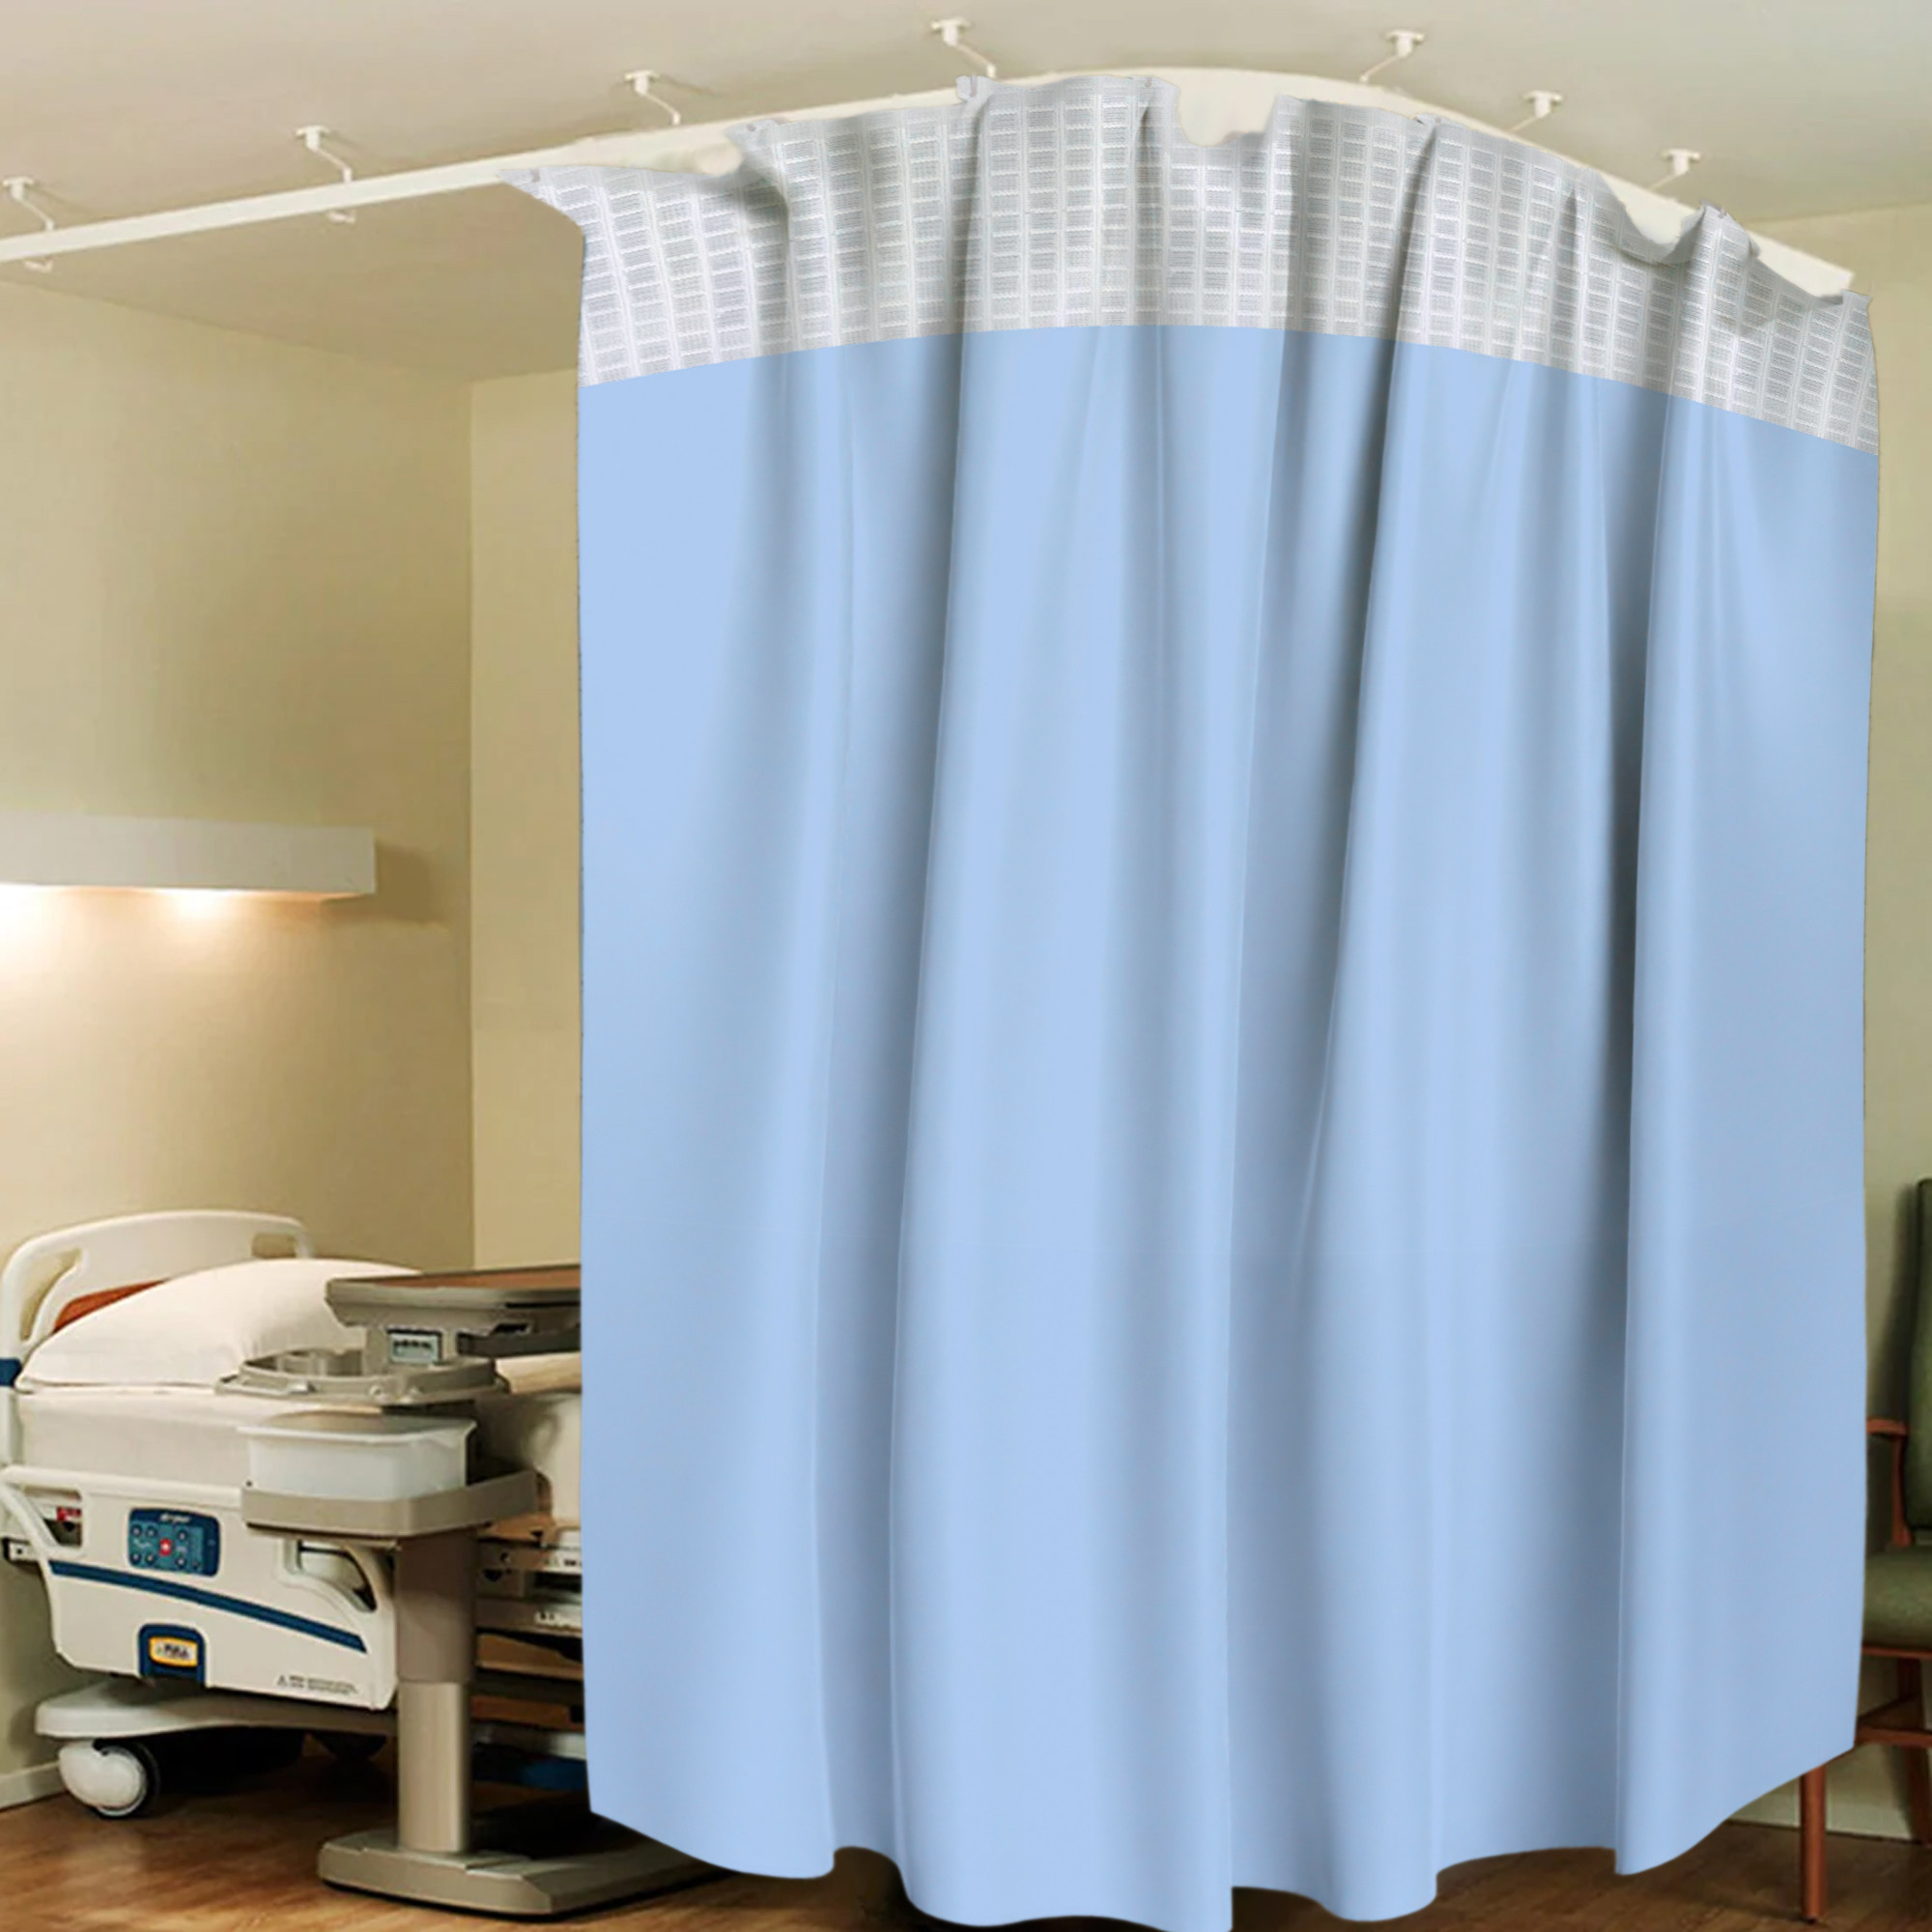 Kuber Industries AC Curtain | PVC Hospital Bed Curtain | Curtains for Hospital | Curtain for Bathroom | Window Blackout Curtain | Shower Curtain with 8 Rings | 7 Feet | Blue